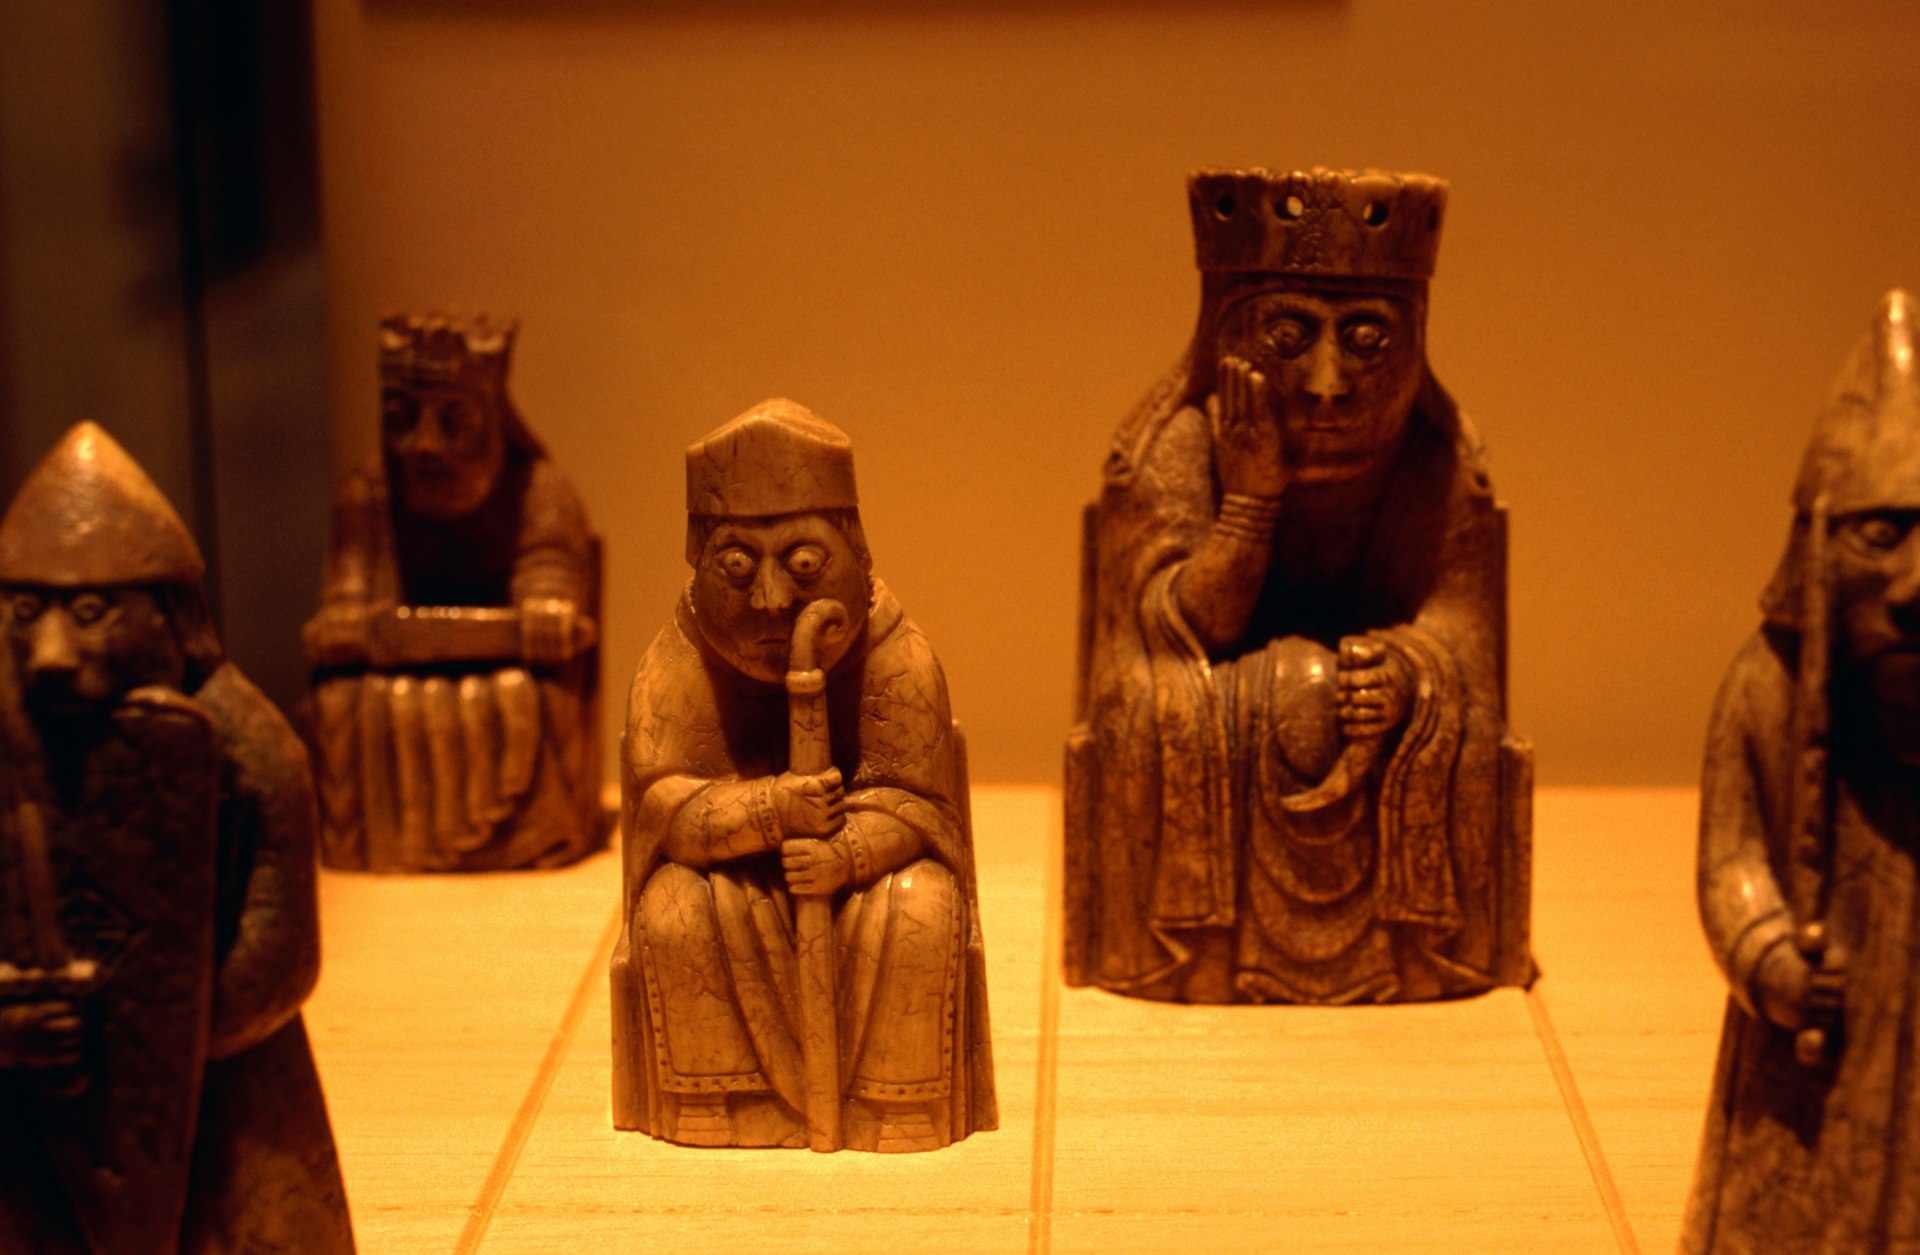 12th Century chess pieces (the Lewis Chess men) in the Museum of Scotland